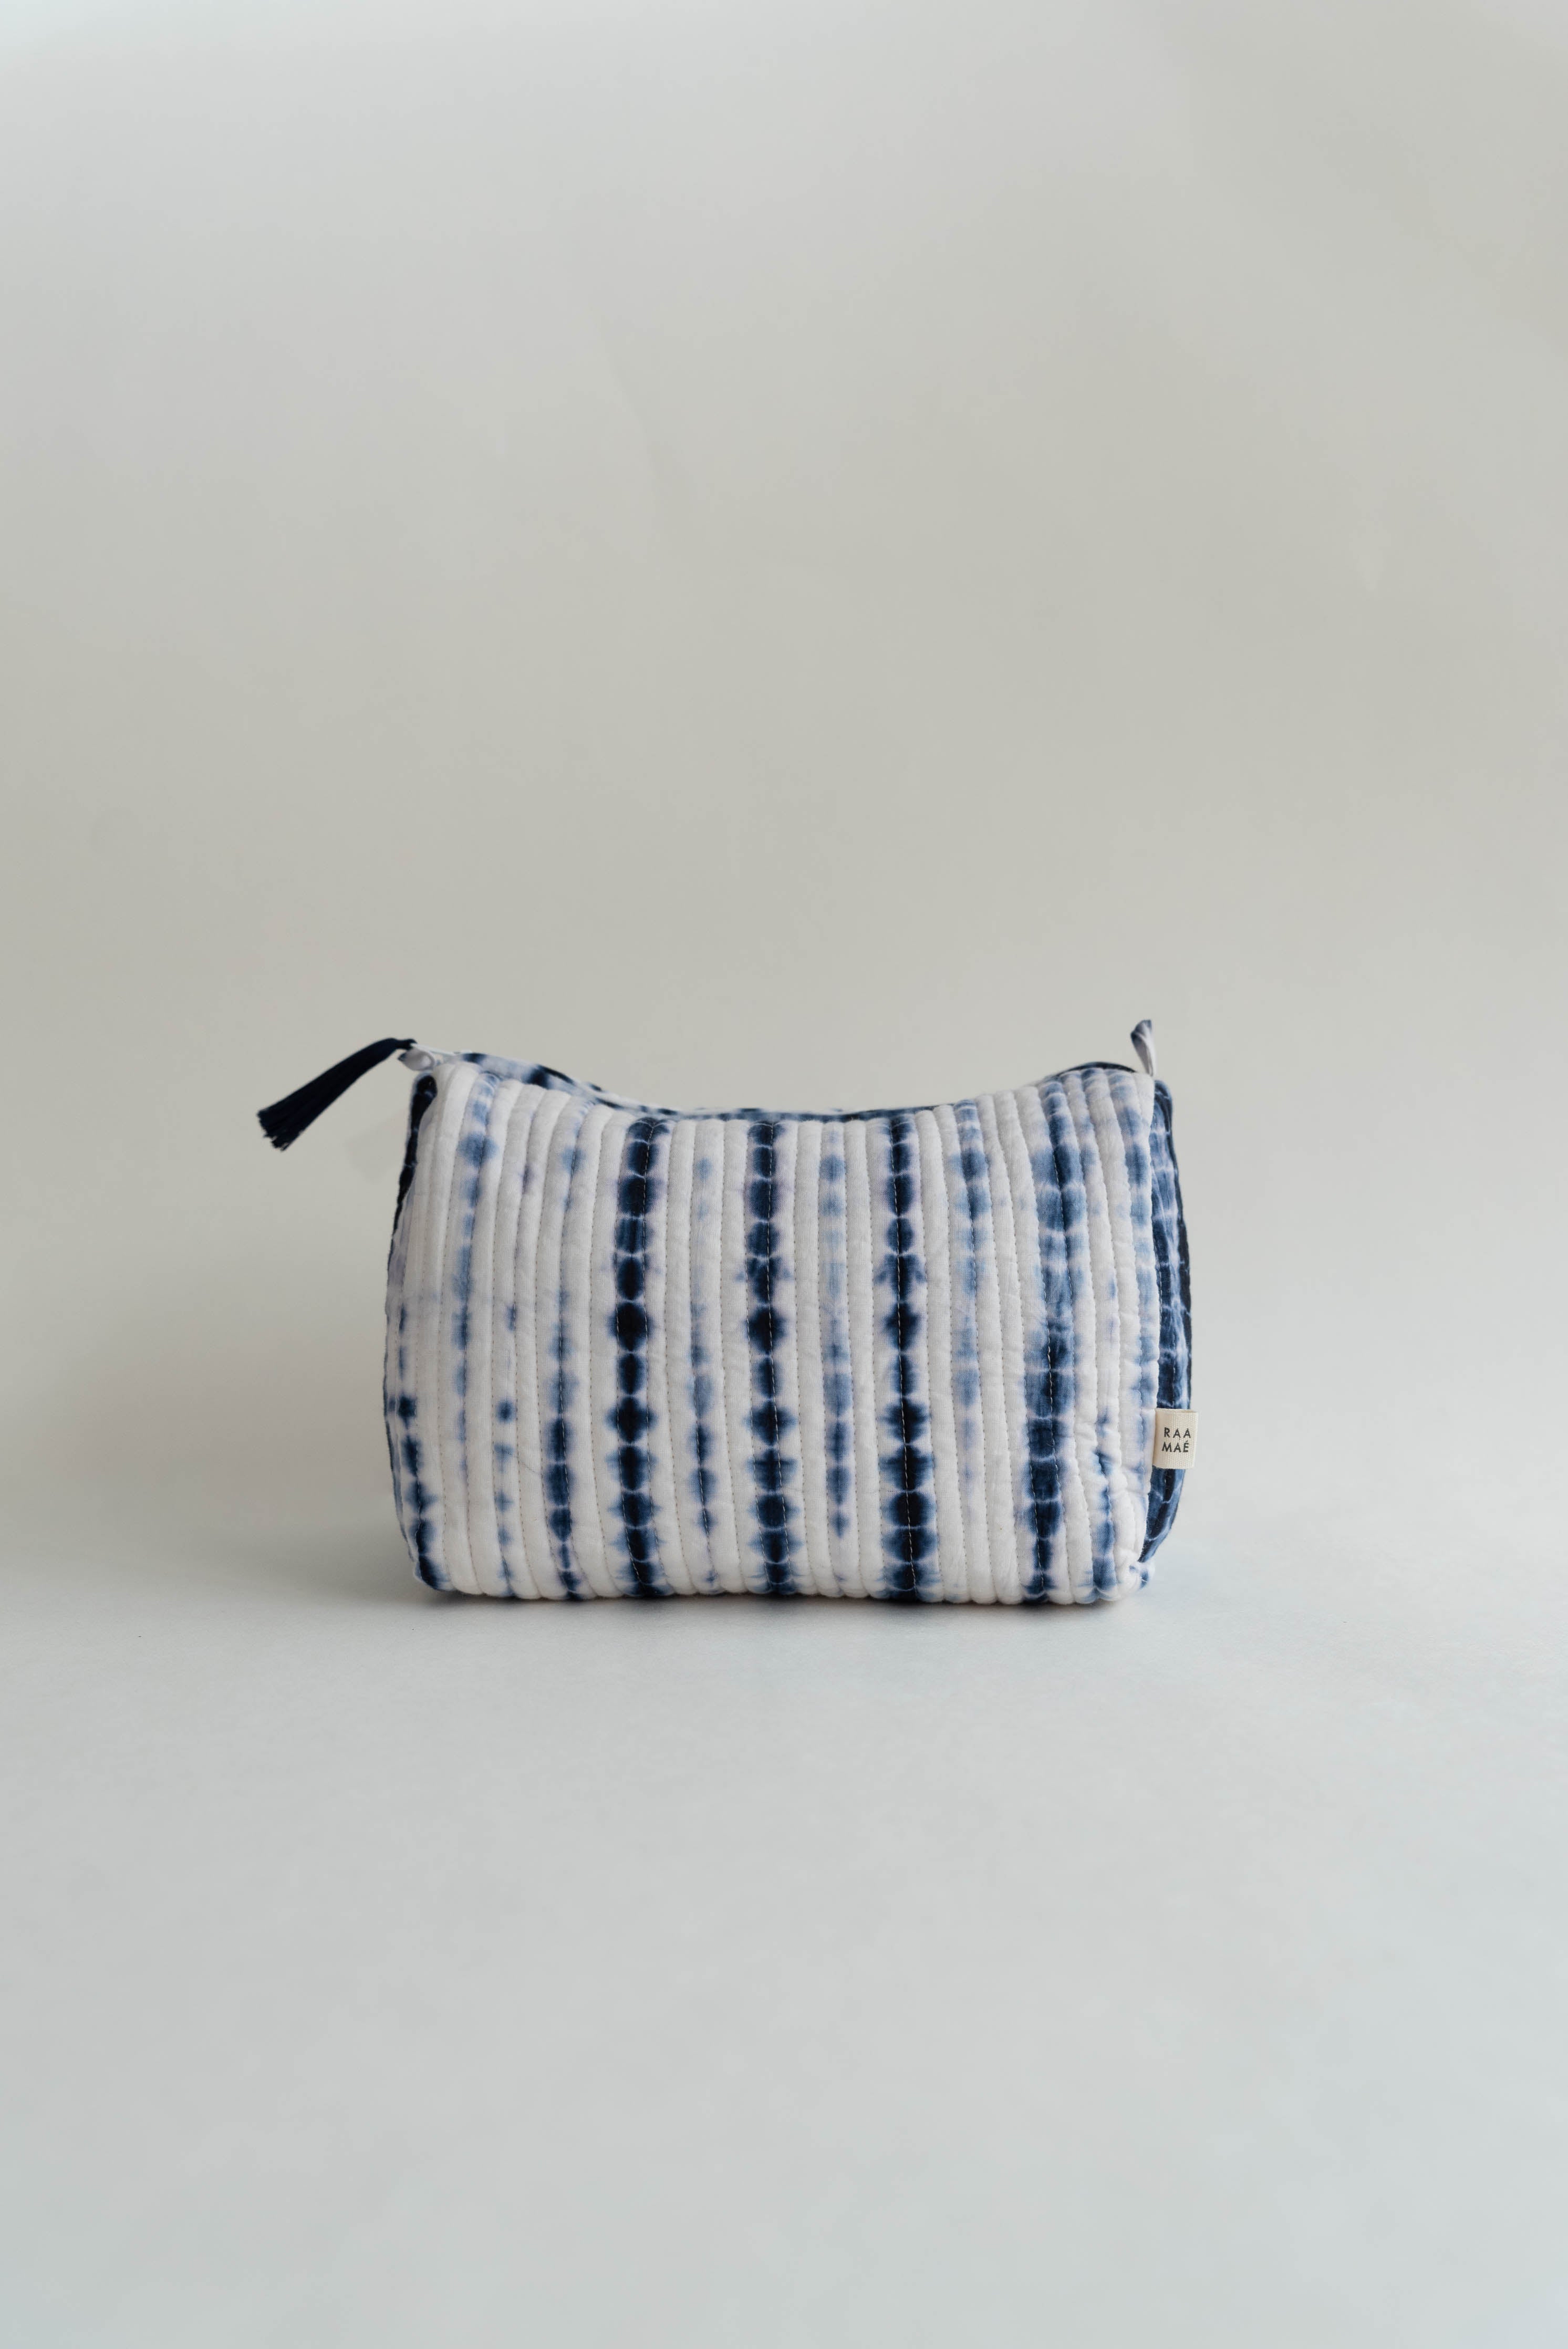 Shibori Quilted Wash/Toiletry Bag with Waterproof Lining - Indigo